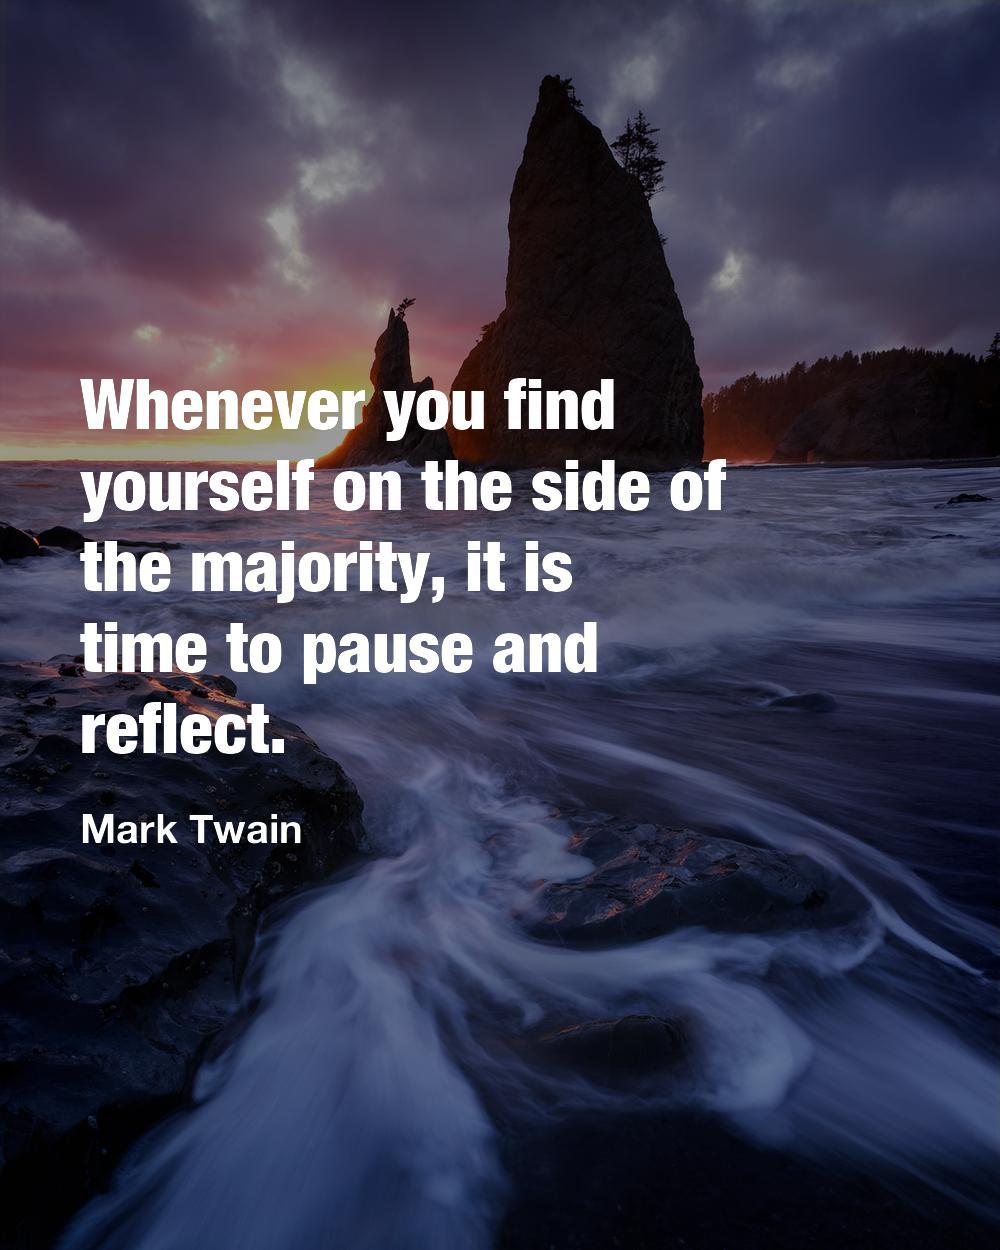 Whenever you find yourself on the side of the majority, it is time to pause and reflect.